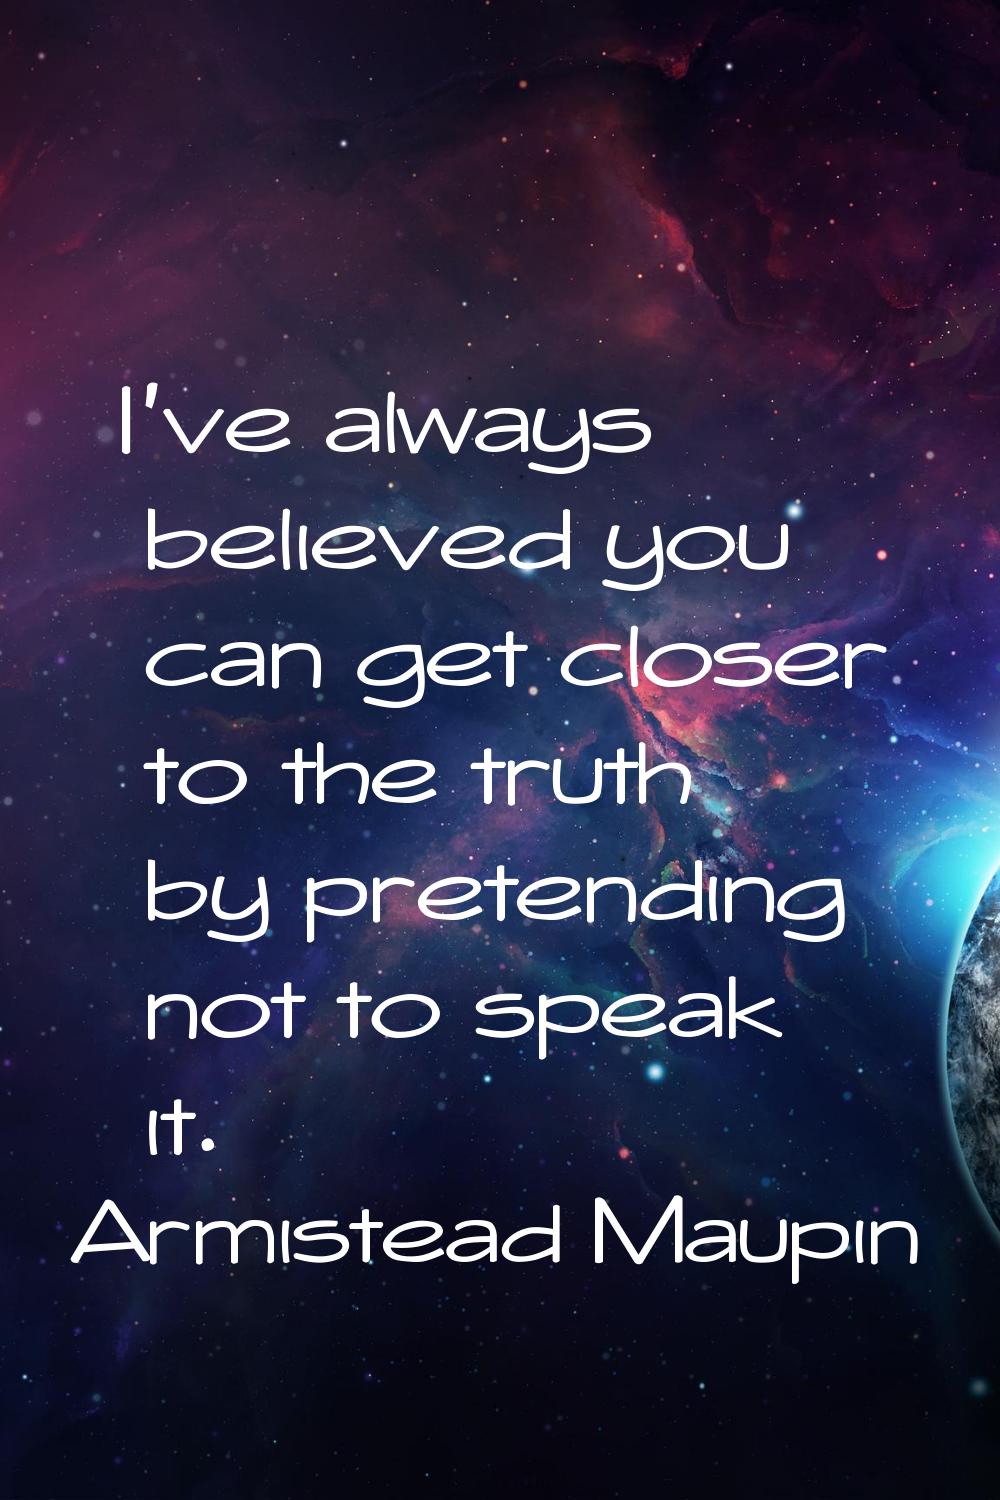 I've always believed you can get closer to the truth by pretending not to speak it.